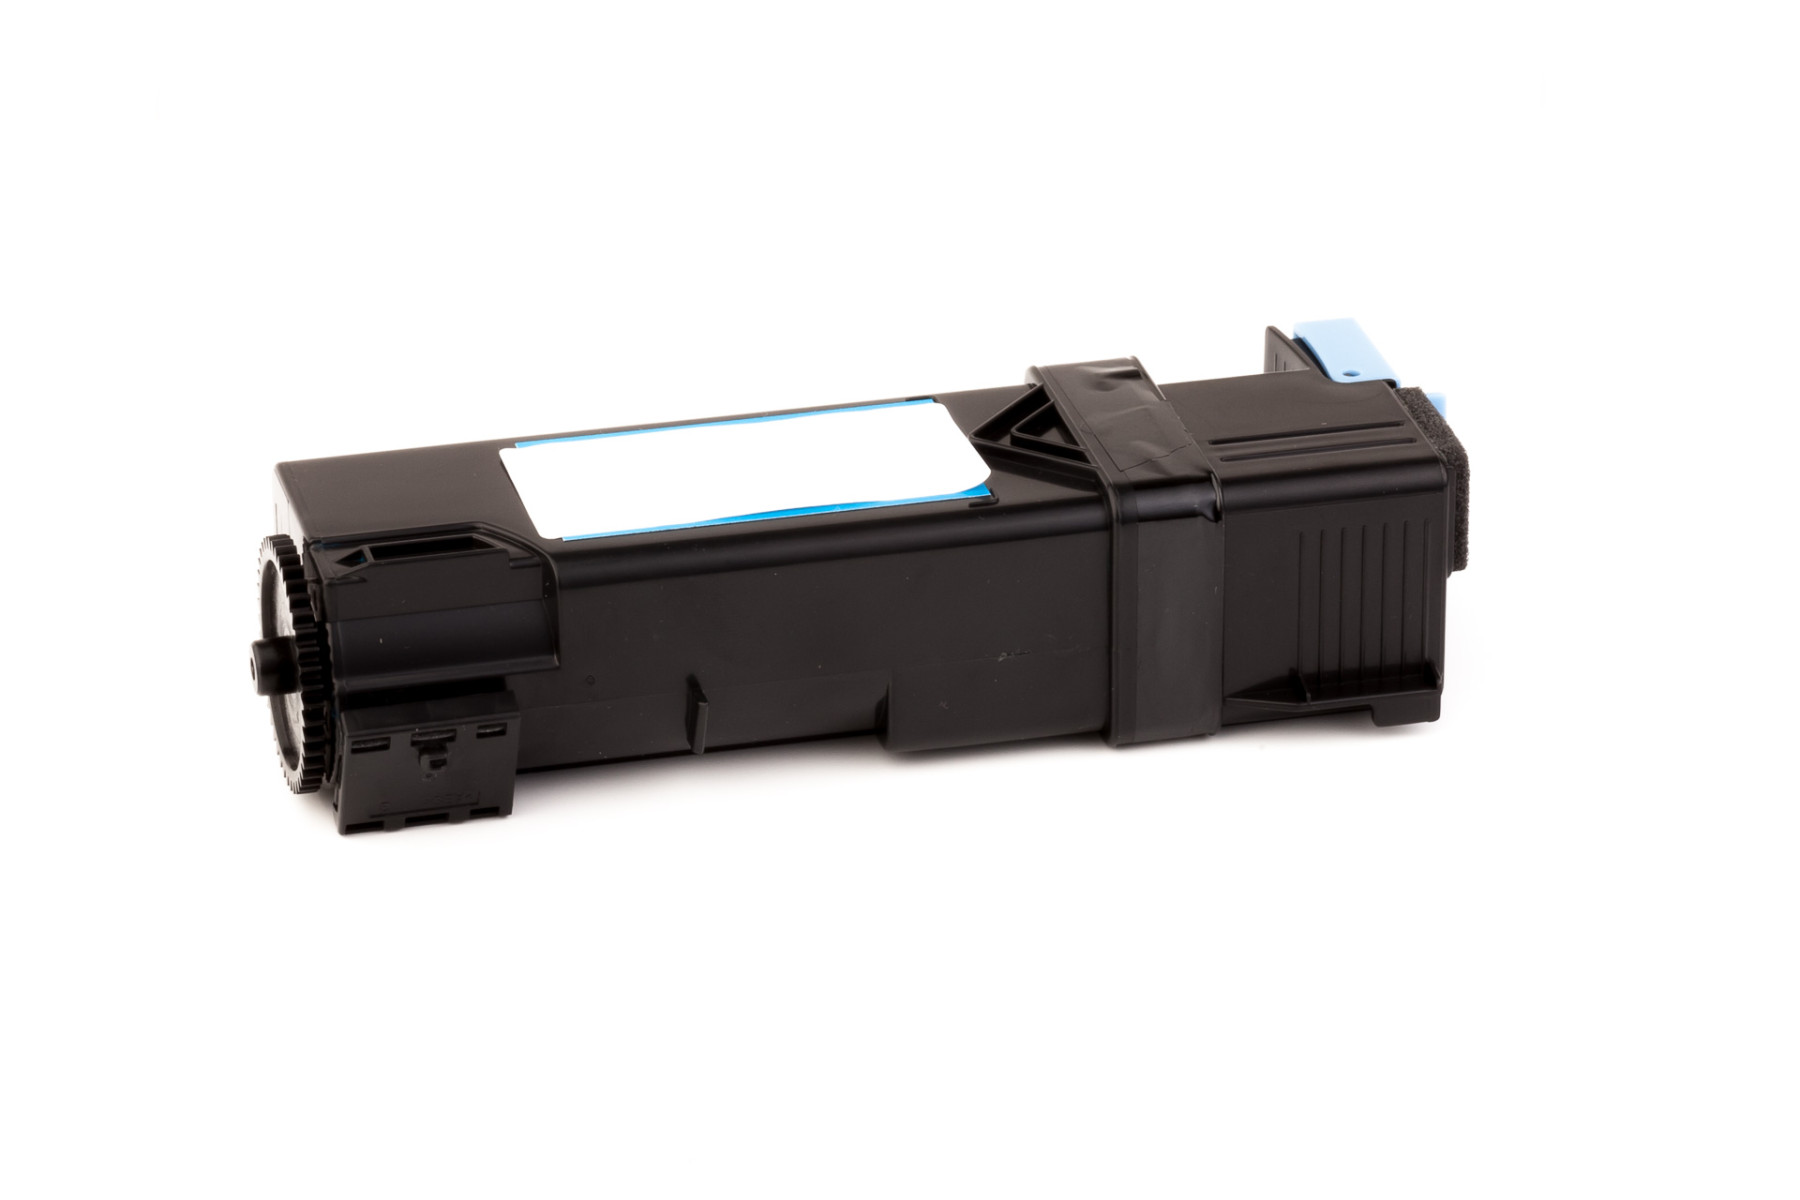 Set consisting of Toner cartridge (alternative) compatible with Epson - C13S050630 /  C 13 S0 50630 /  0630 - Aculaser C 2900 DN black, C13S050629 /  C 13 S0 50629 /  0629 - Aculaser C 2900 DN cyan, C13S050628 /  C 13 S0 50628 /  0628 - Aculaser C 2900 DN